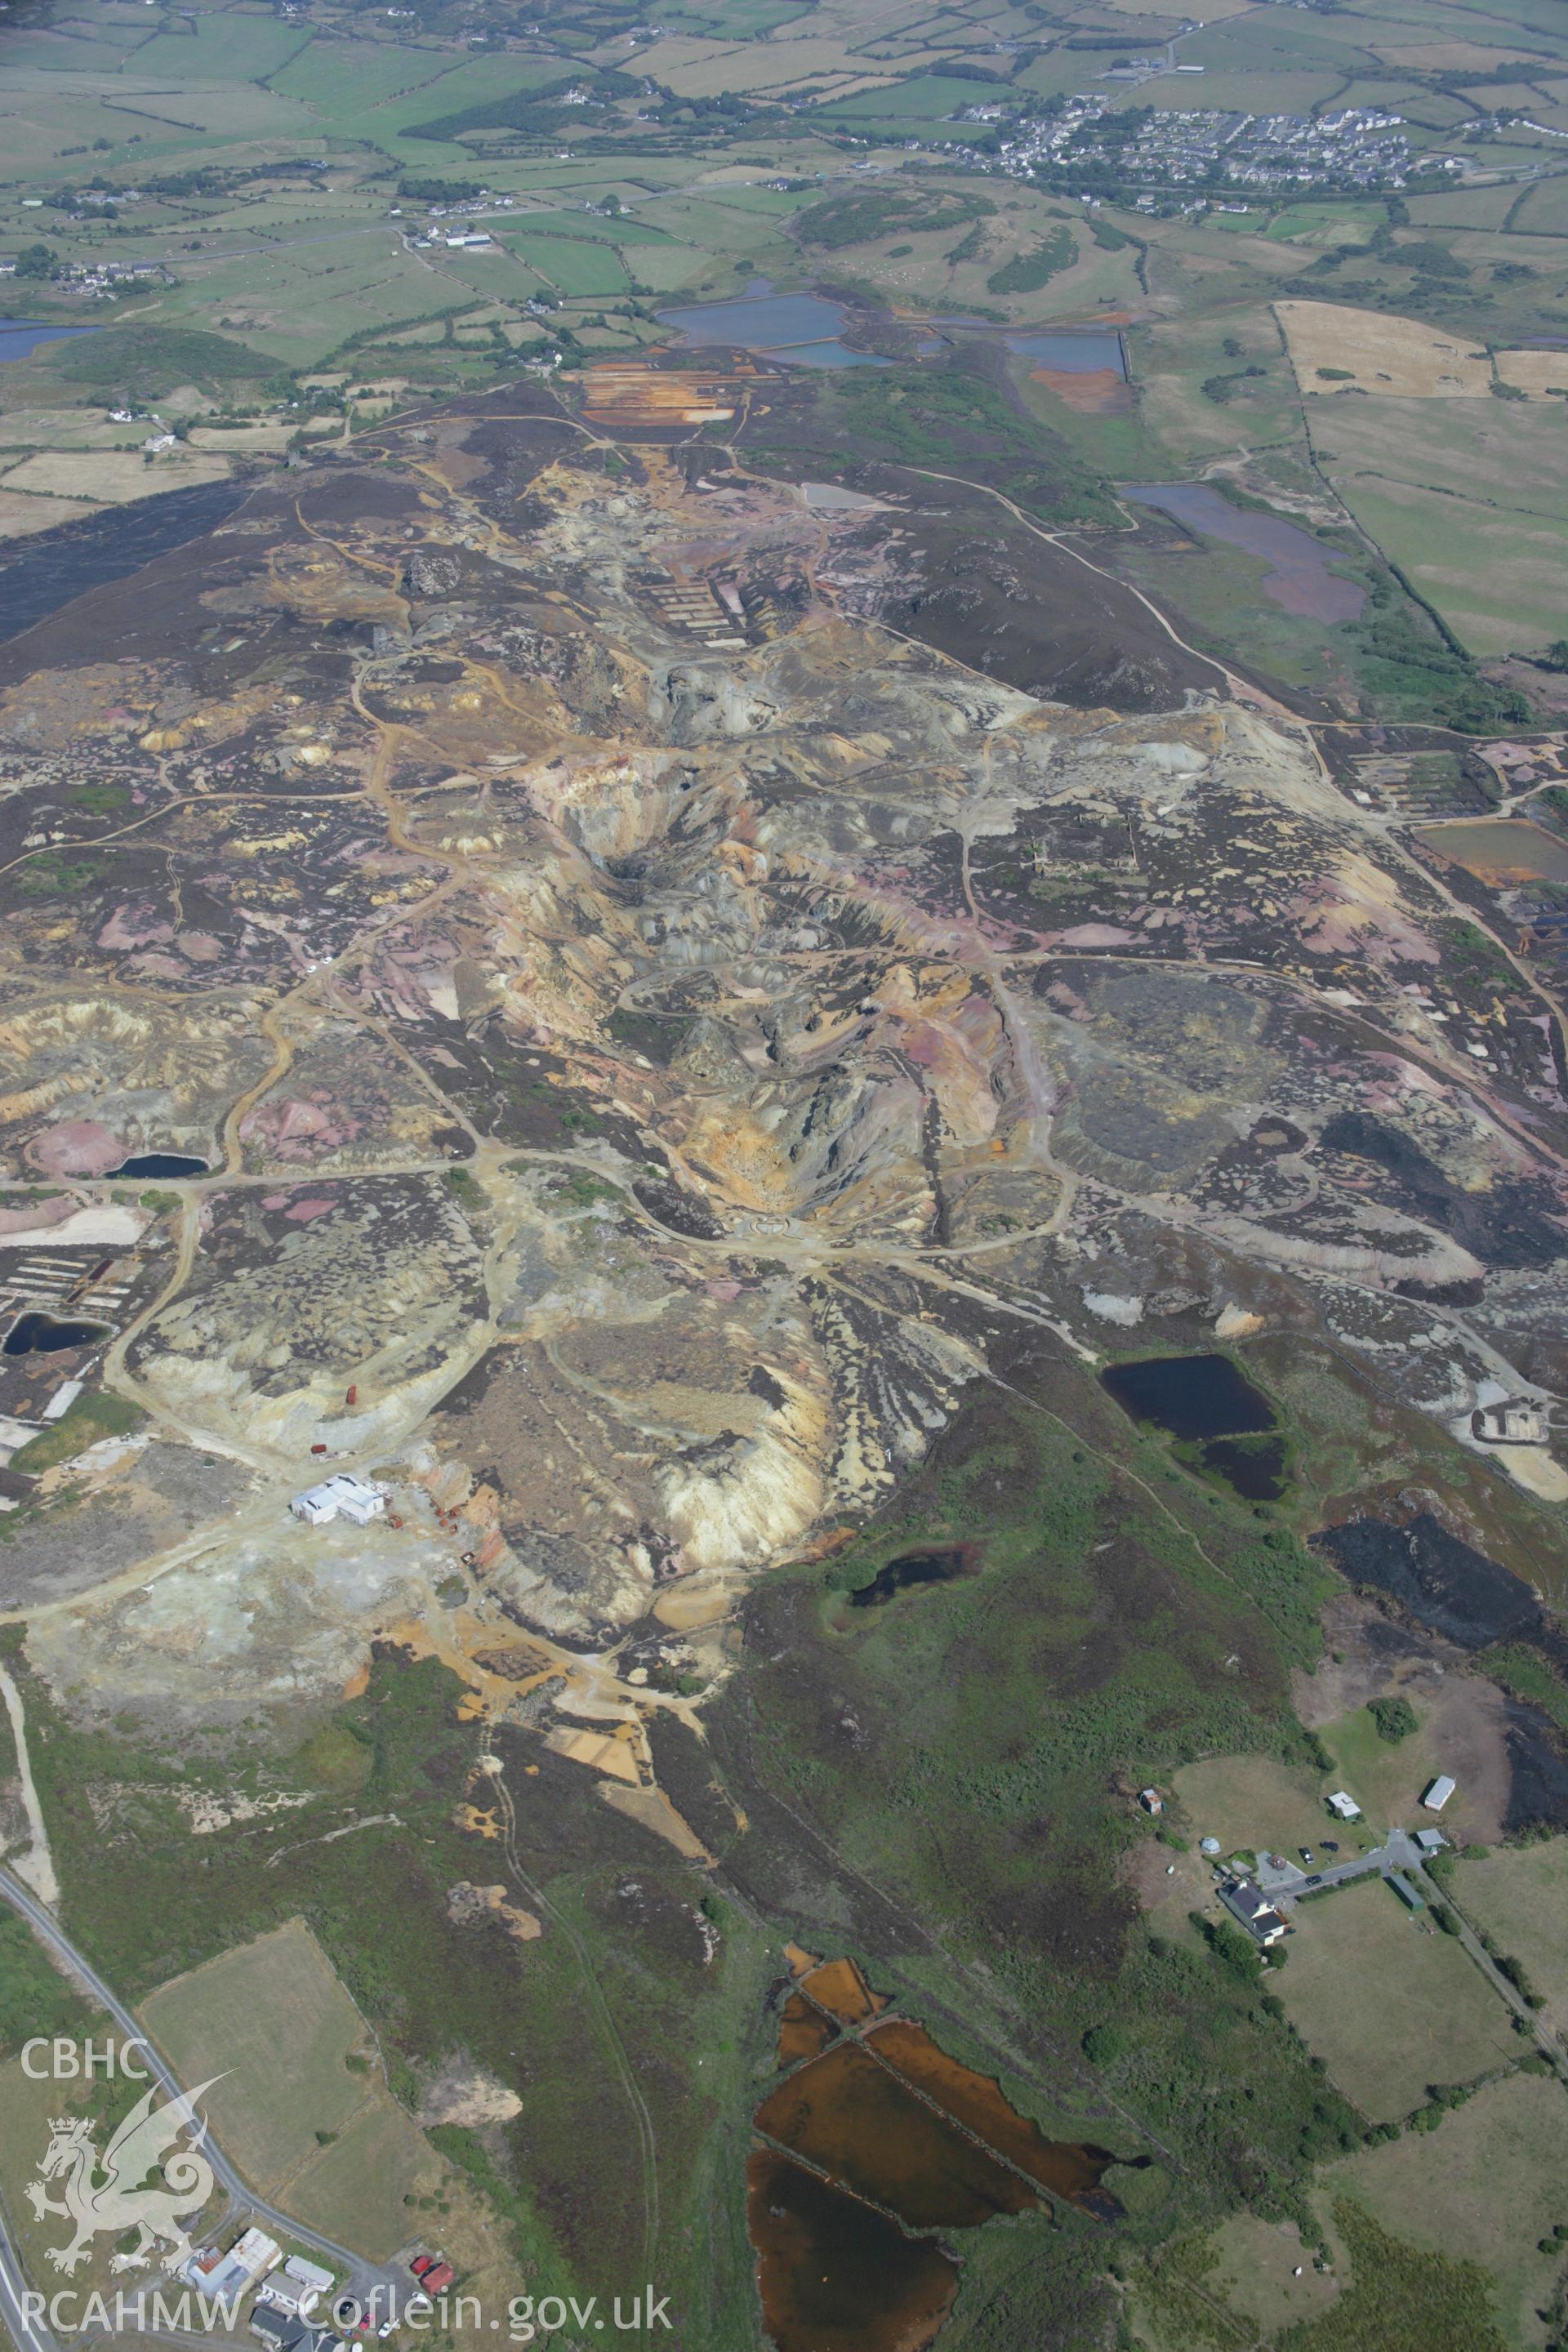 RCAHMW colour oblique aerial photograph of Parys Mountain Copper Mines, Amlwch. Taken on 14 August 2006 by Toby Driver.